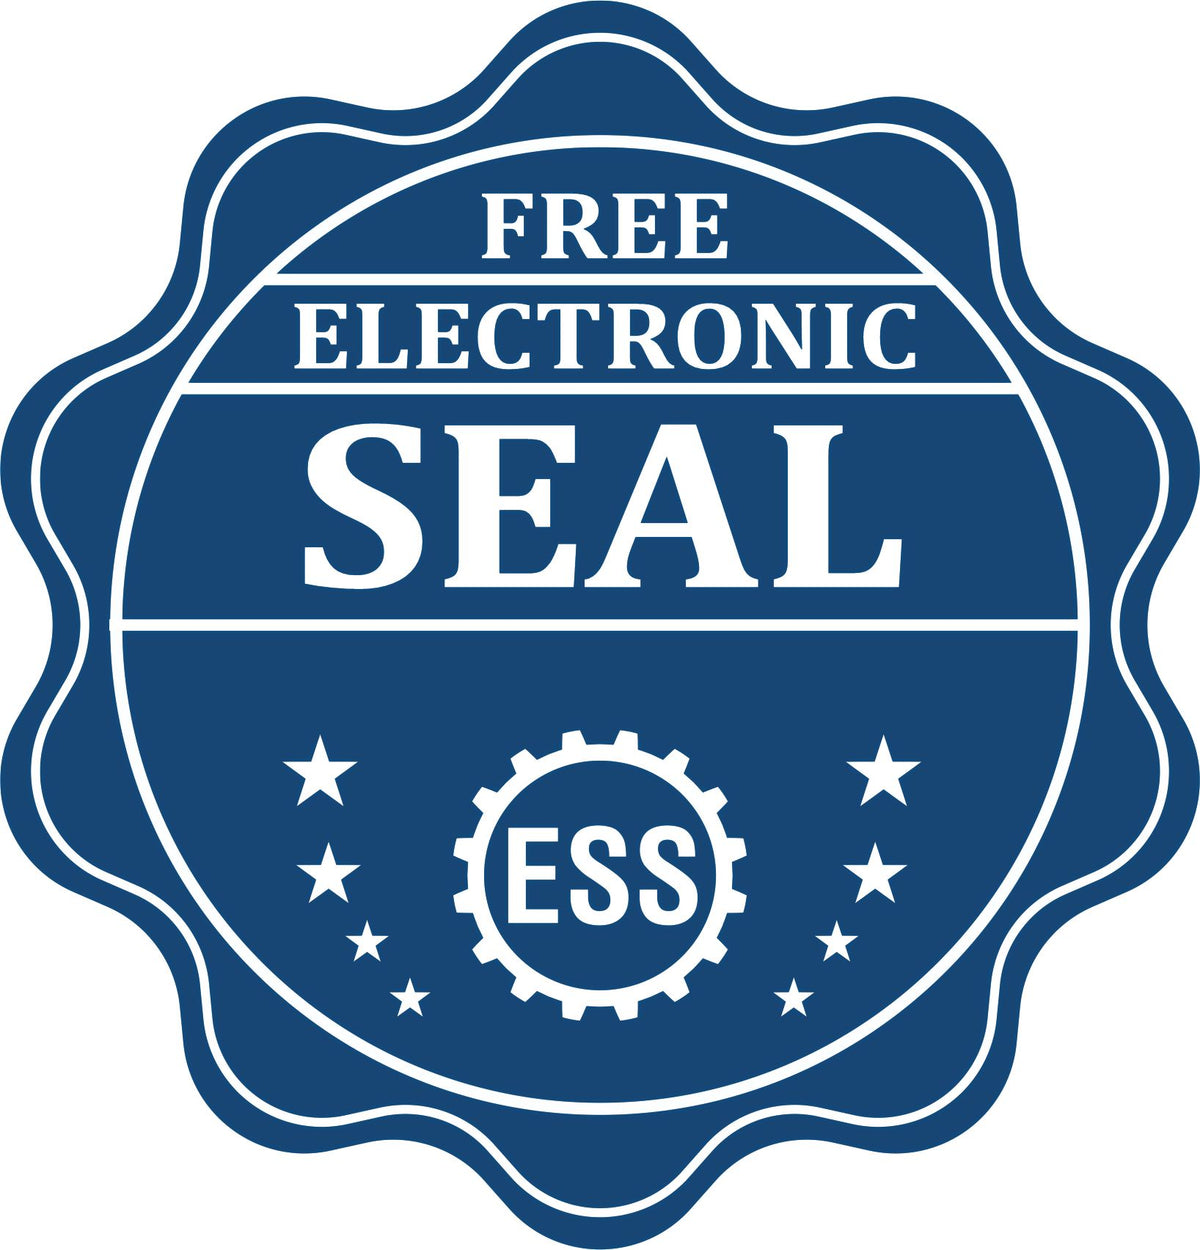 A badge showing a free electronic seal for the Hybrid Illinois Architect Seal with stars and the ESS gear on the emblem.